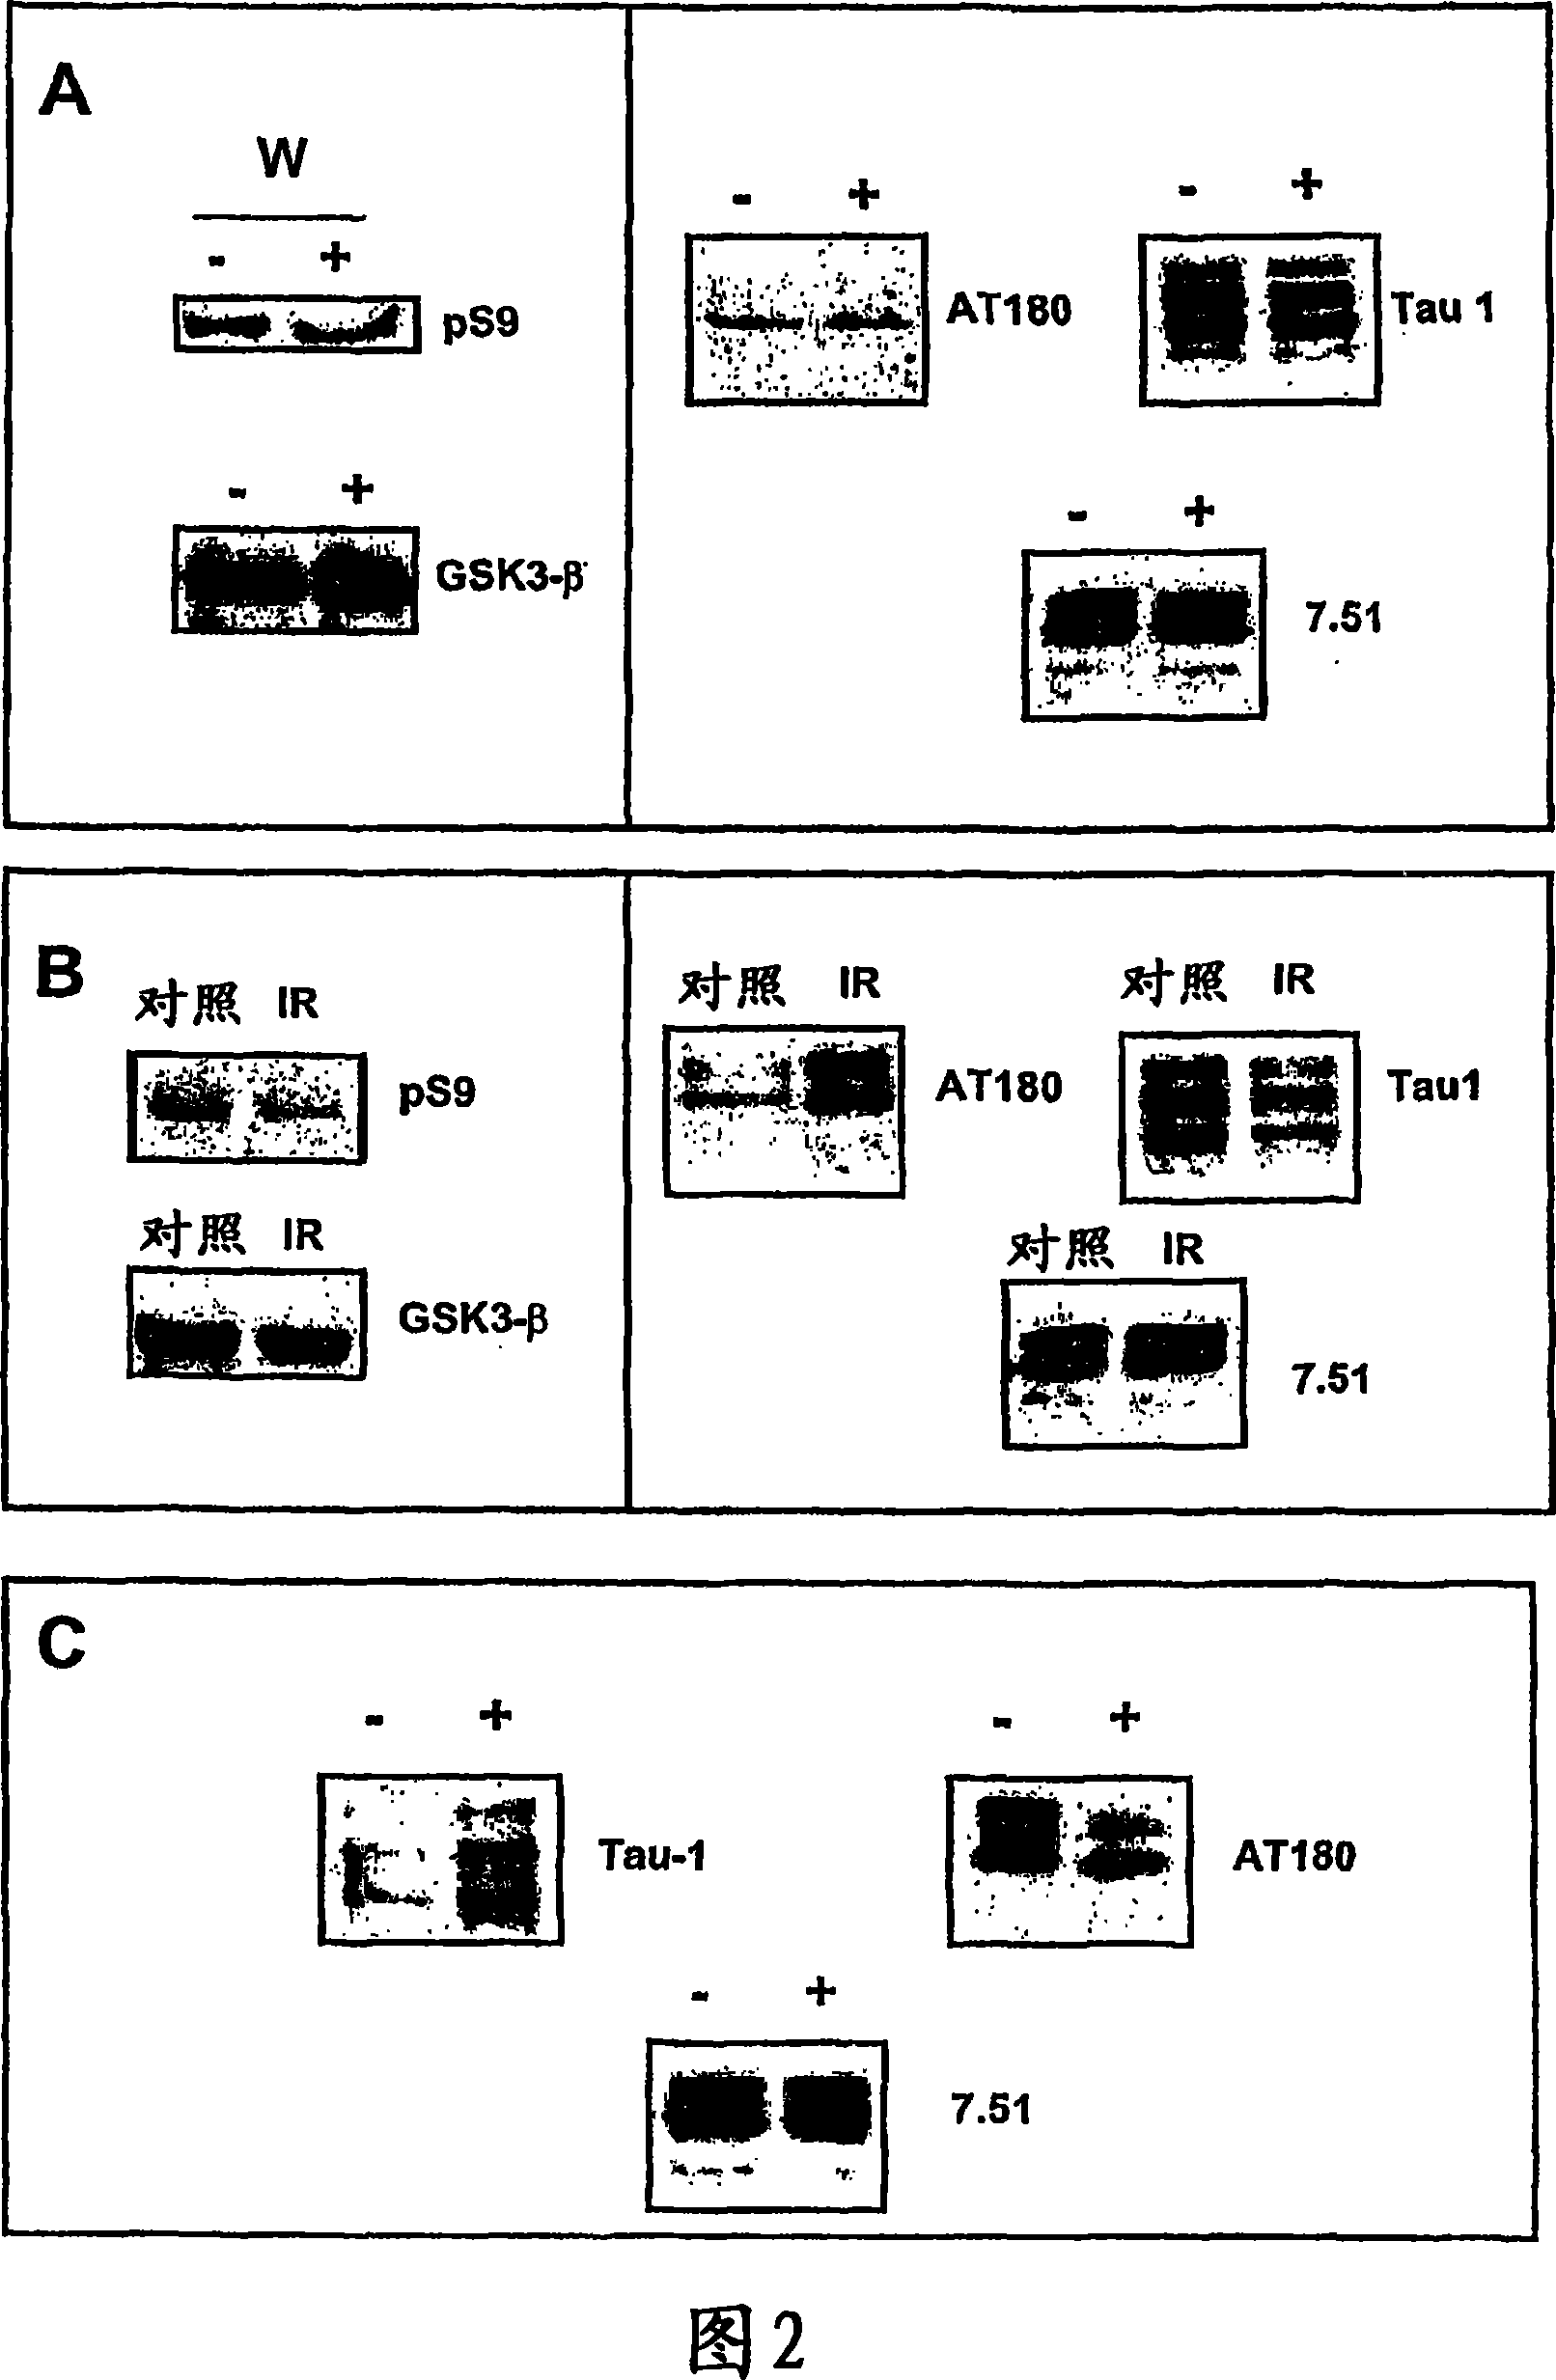 Pharmaceutical compositions comprising a tungsten salt (VI) for the treatment of neurodegenerative disorders, particularly alzheimer's disease and schizophrenia